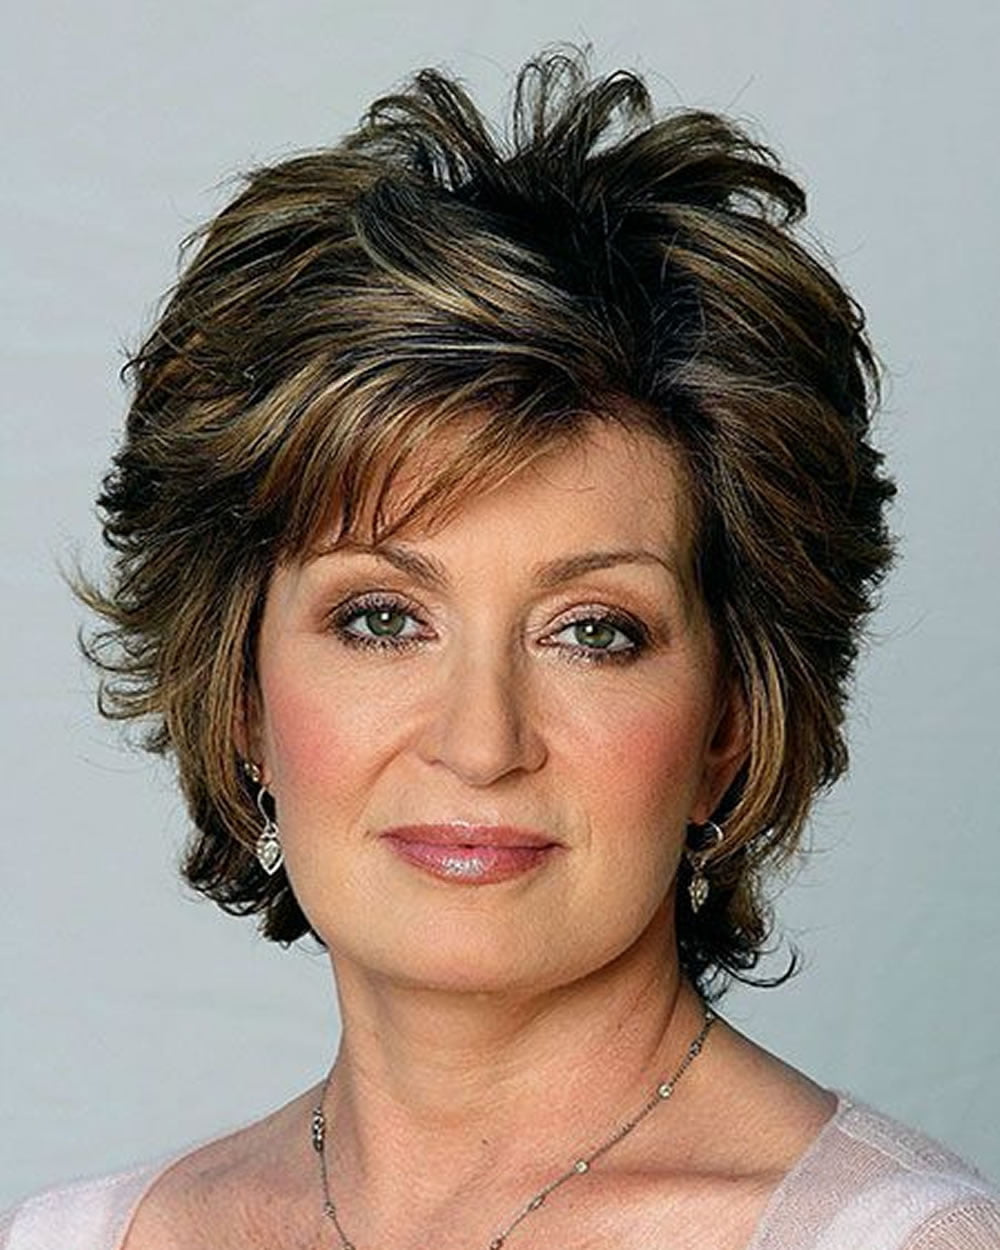 35 Cool Short Hairstyles for Women over 60 in 2021-2022 ...